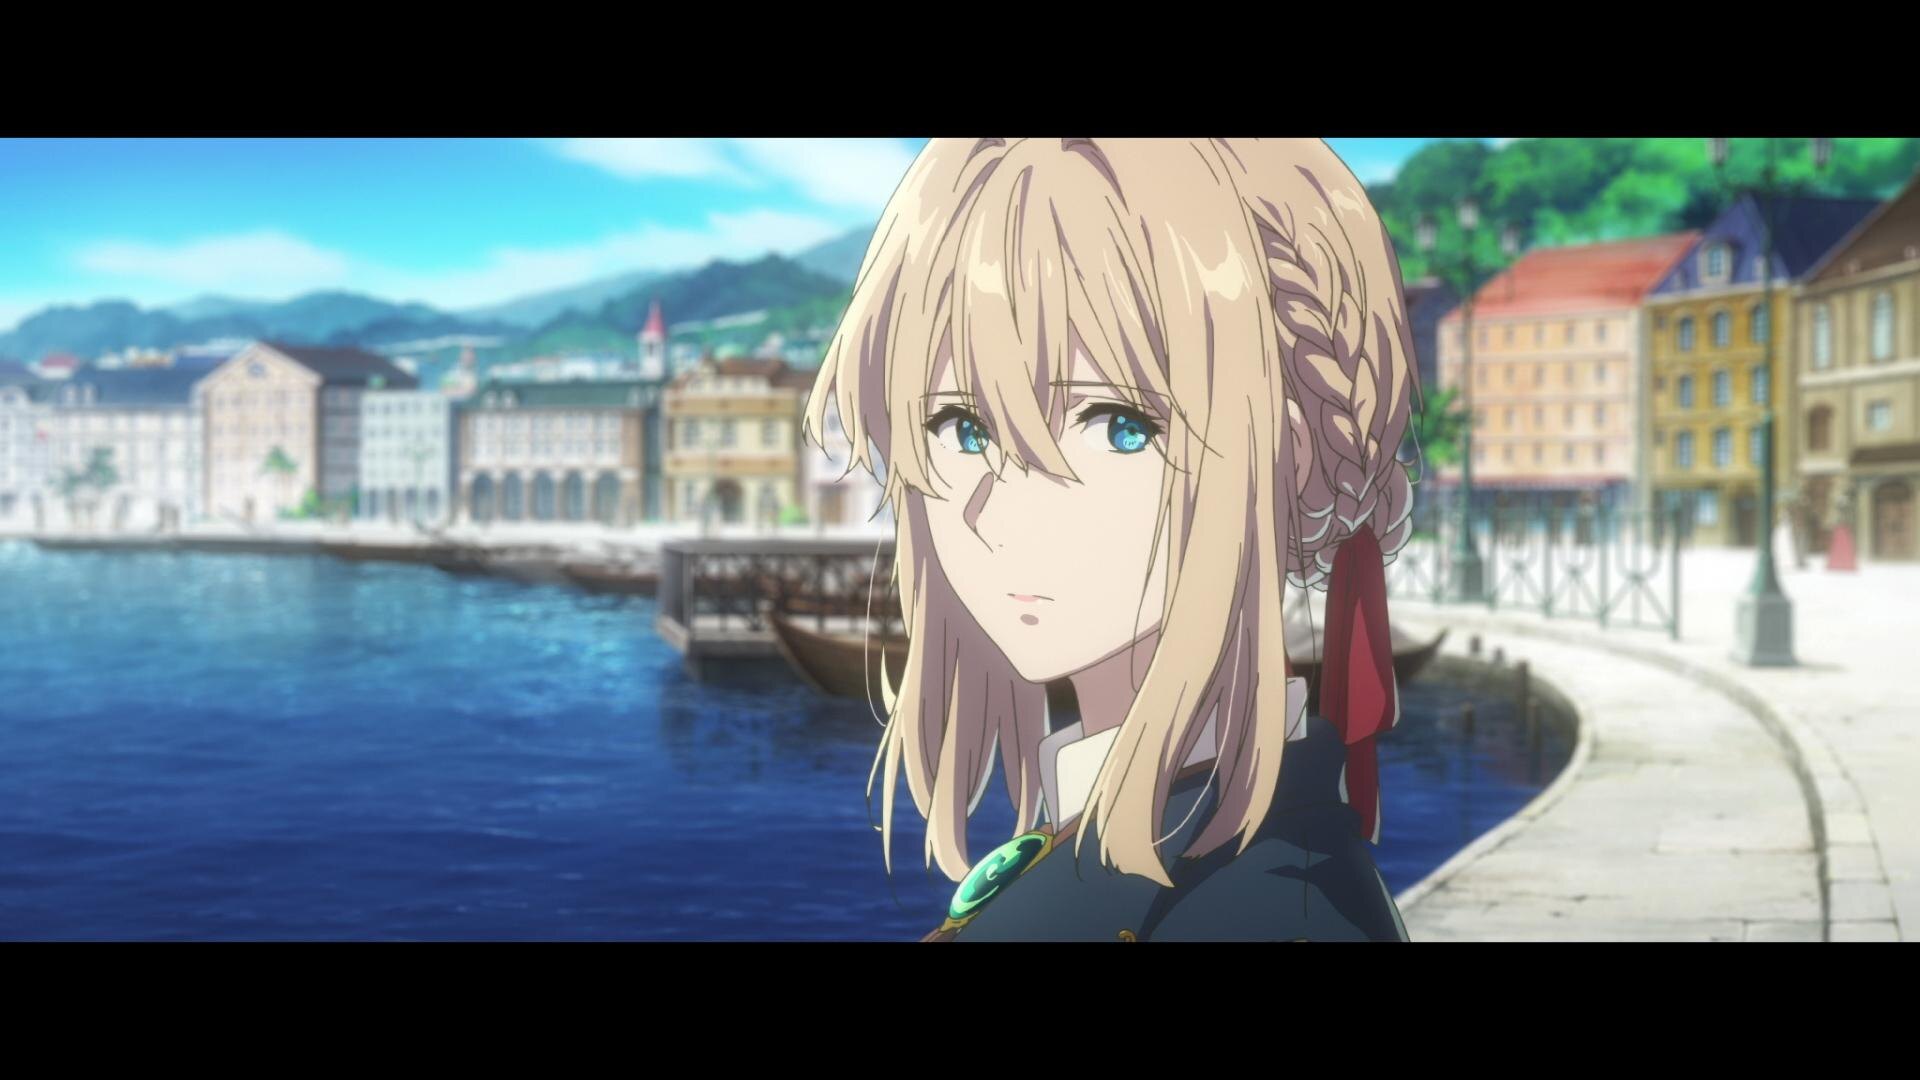 Violet Evergarden The Movie 4K Leads Crunchyroll May 2023 Home Video Lineup